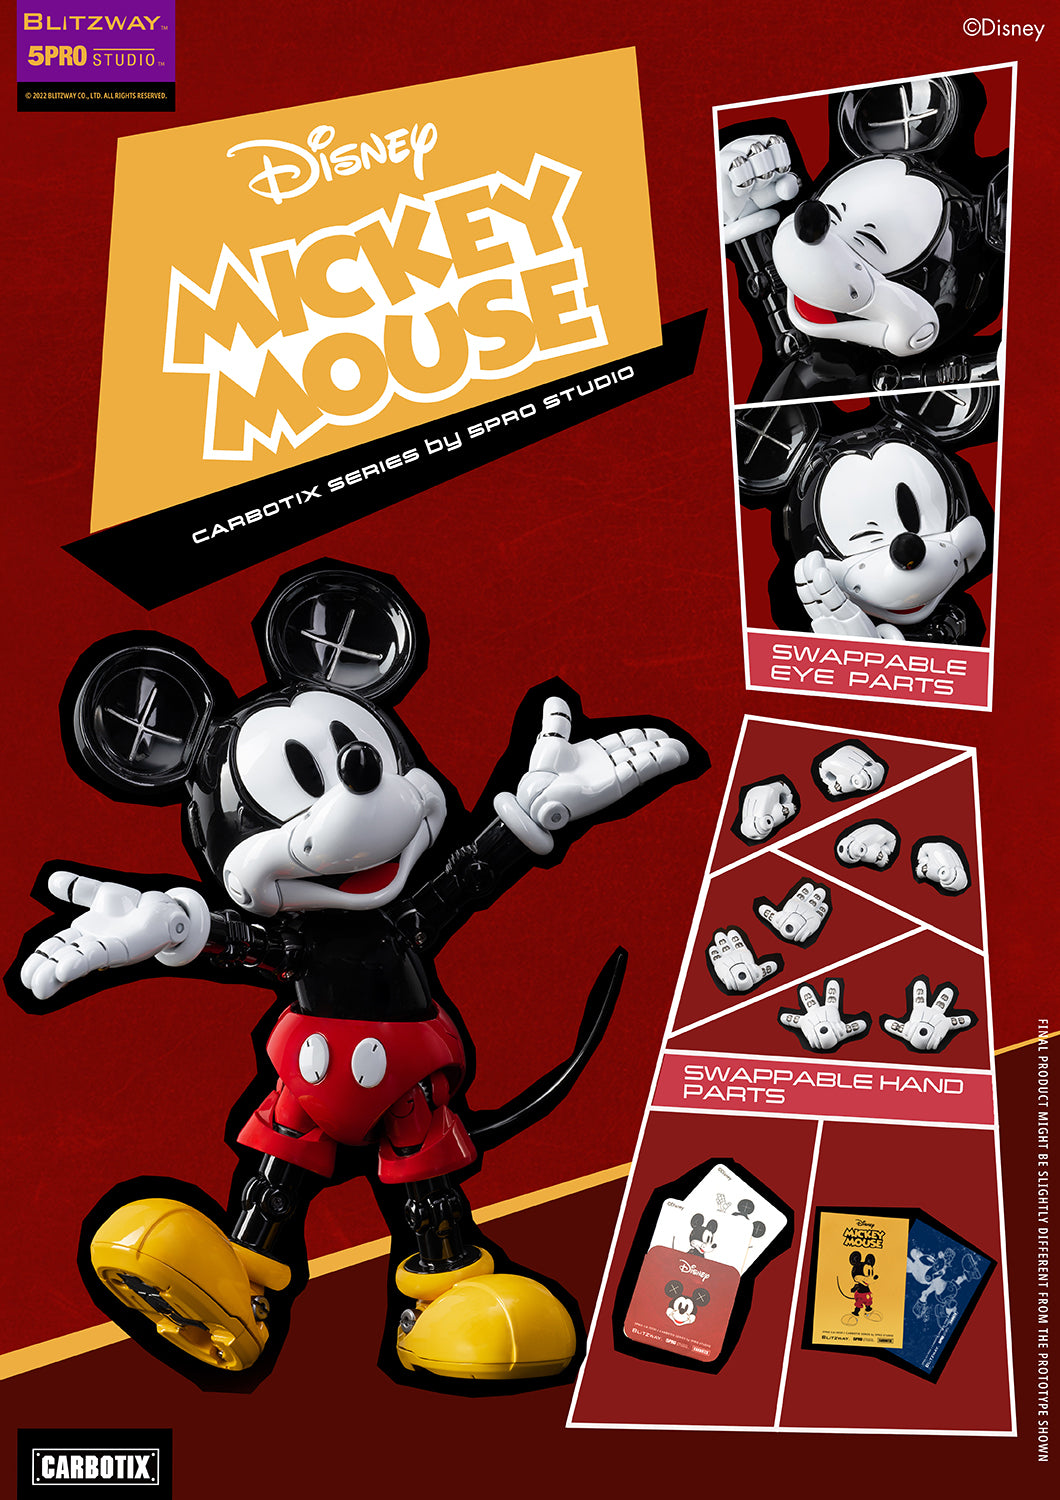 CARBOTIX Mickey Mouse – BLITZWAY JAPAN